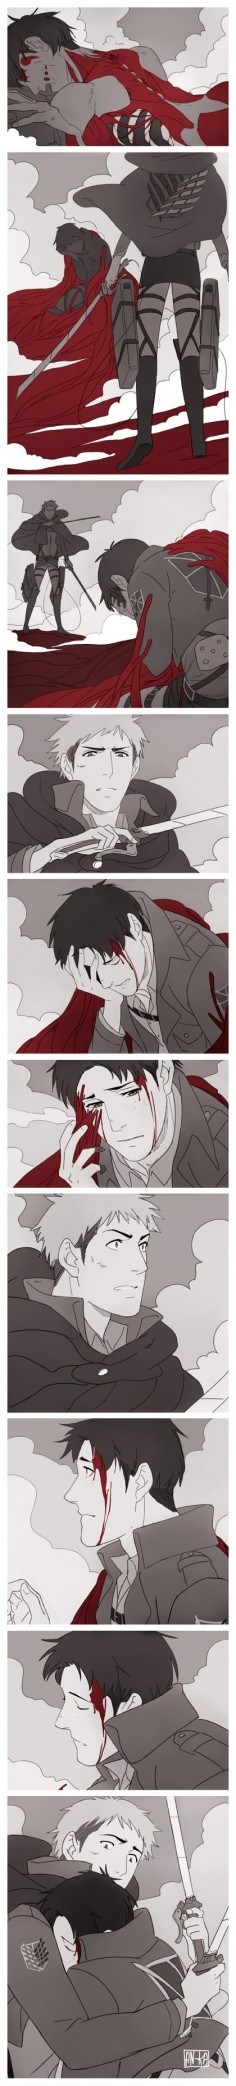 SnK- Marco x Jean- OMFG wat if this actually happened in the show